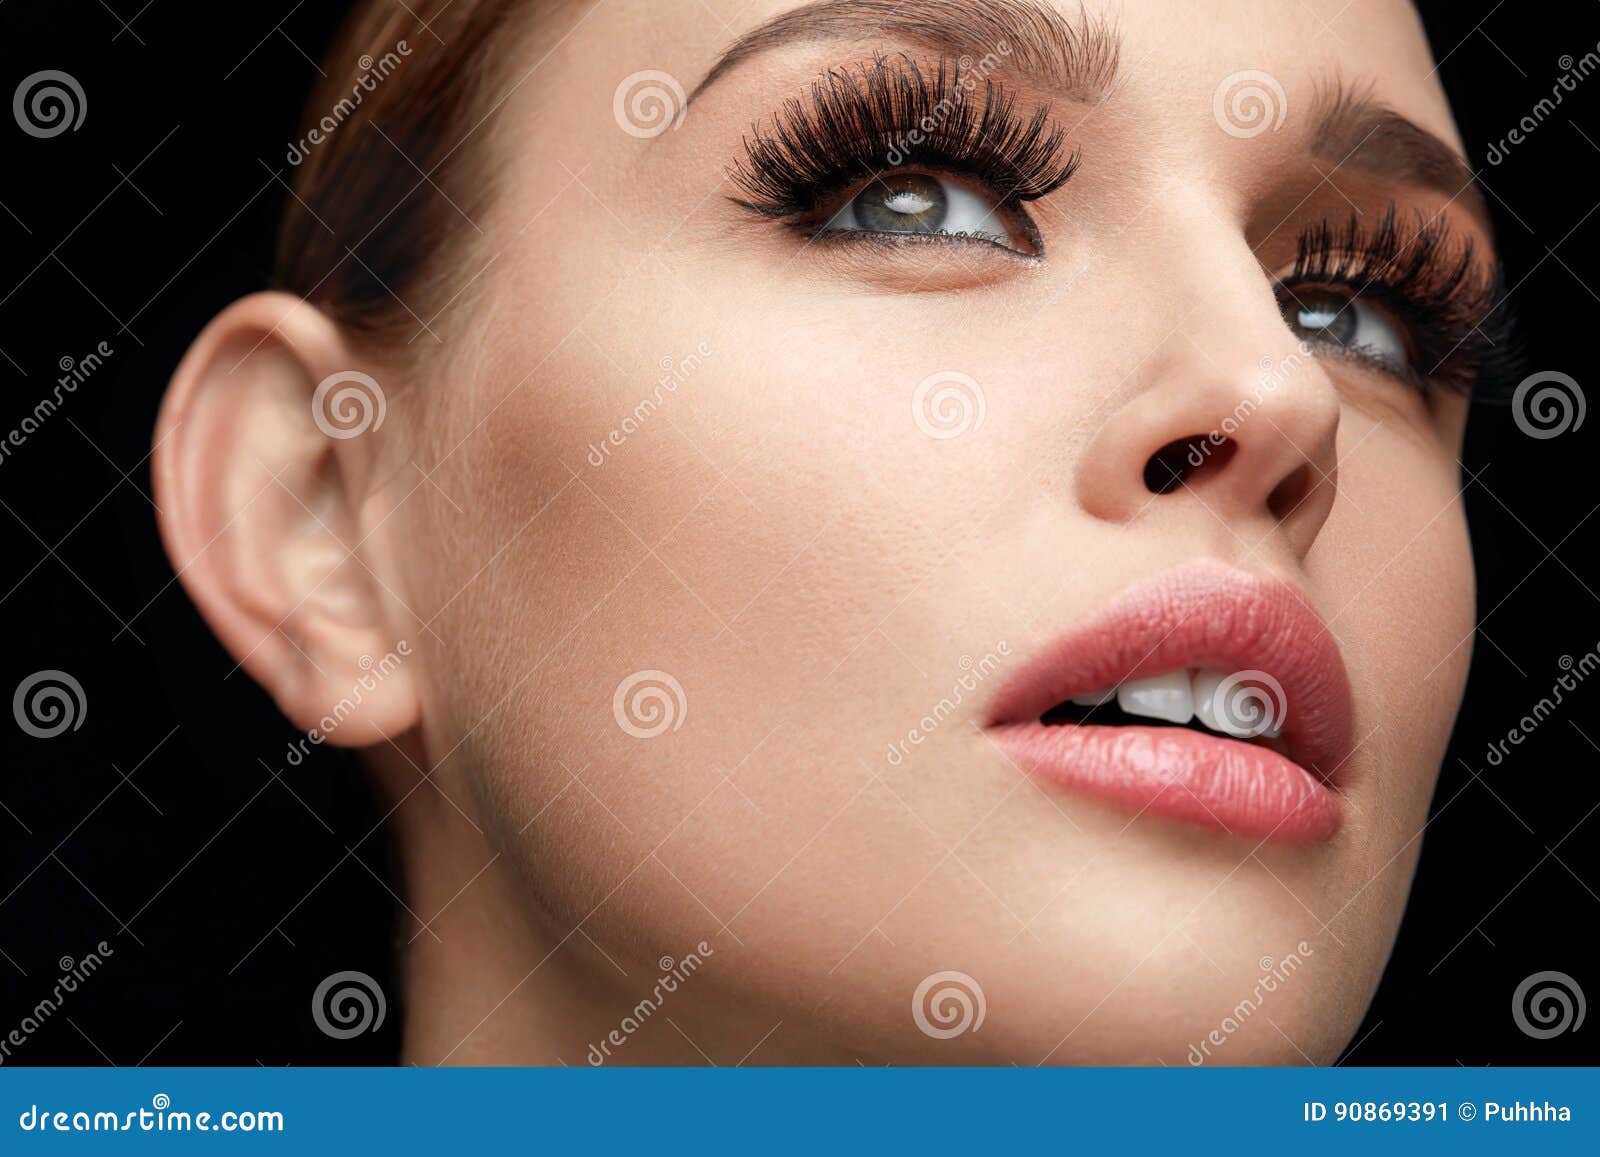 fake eyelashes. beautiful woman with makeup and beauty face